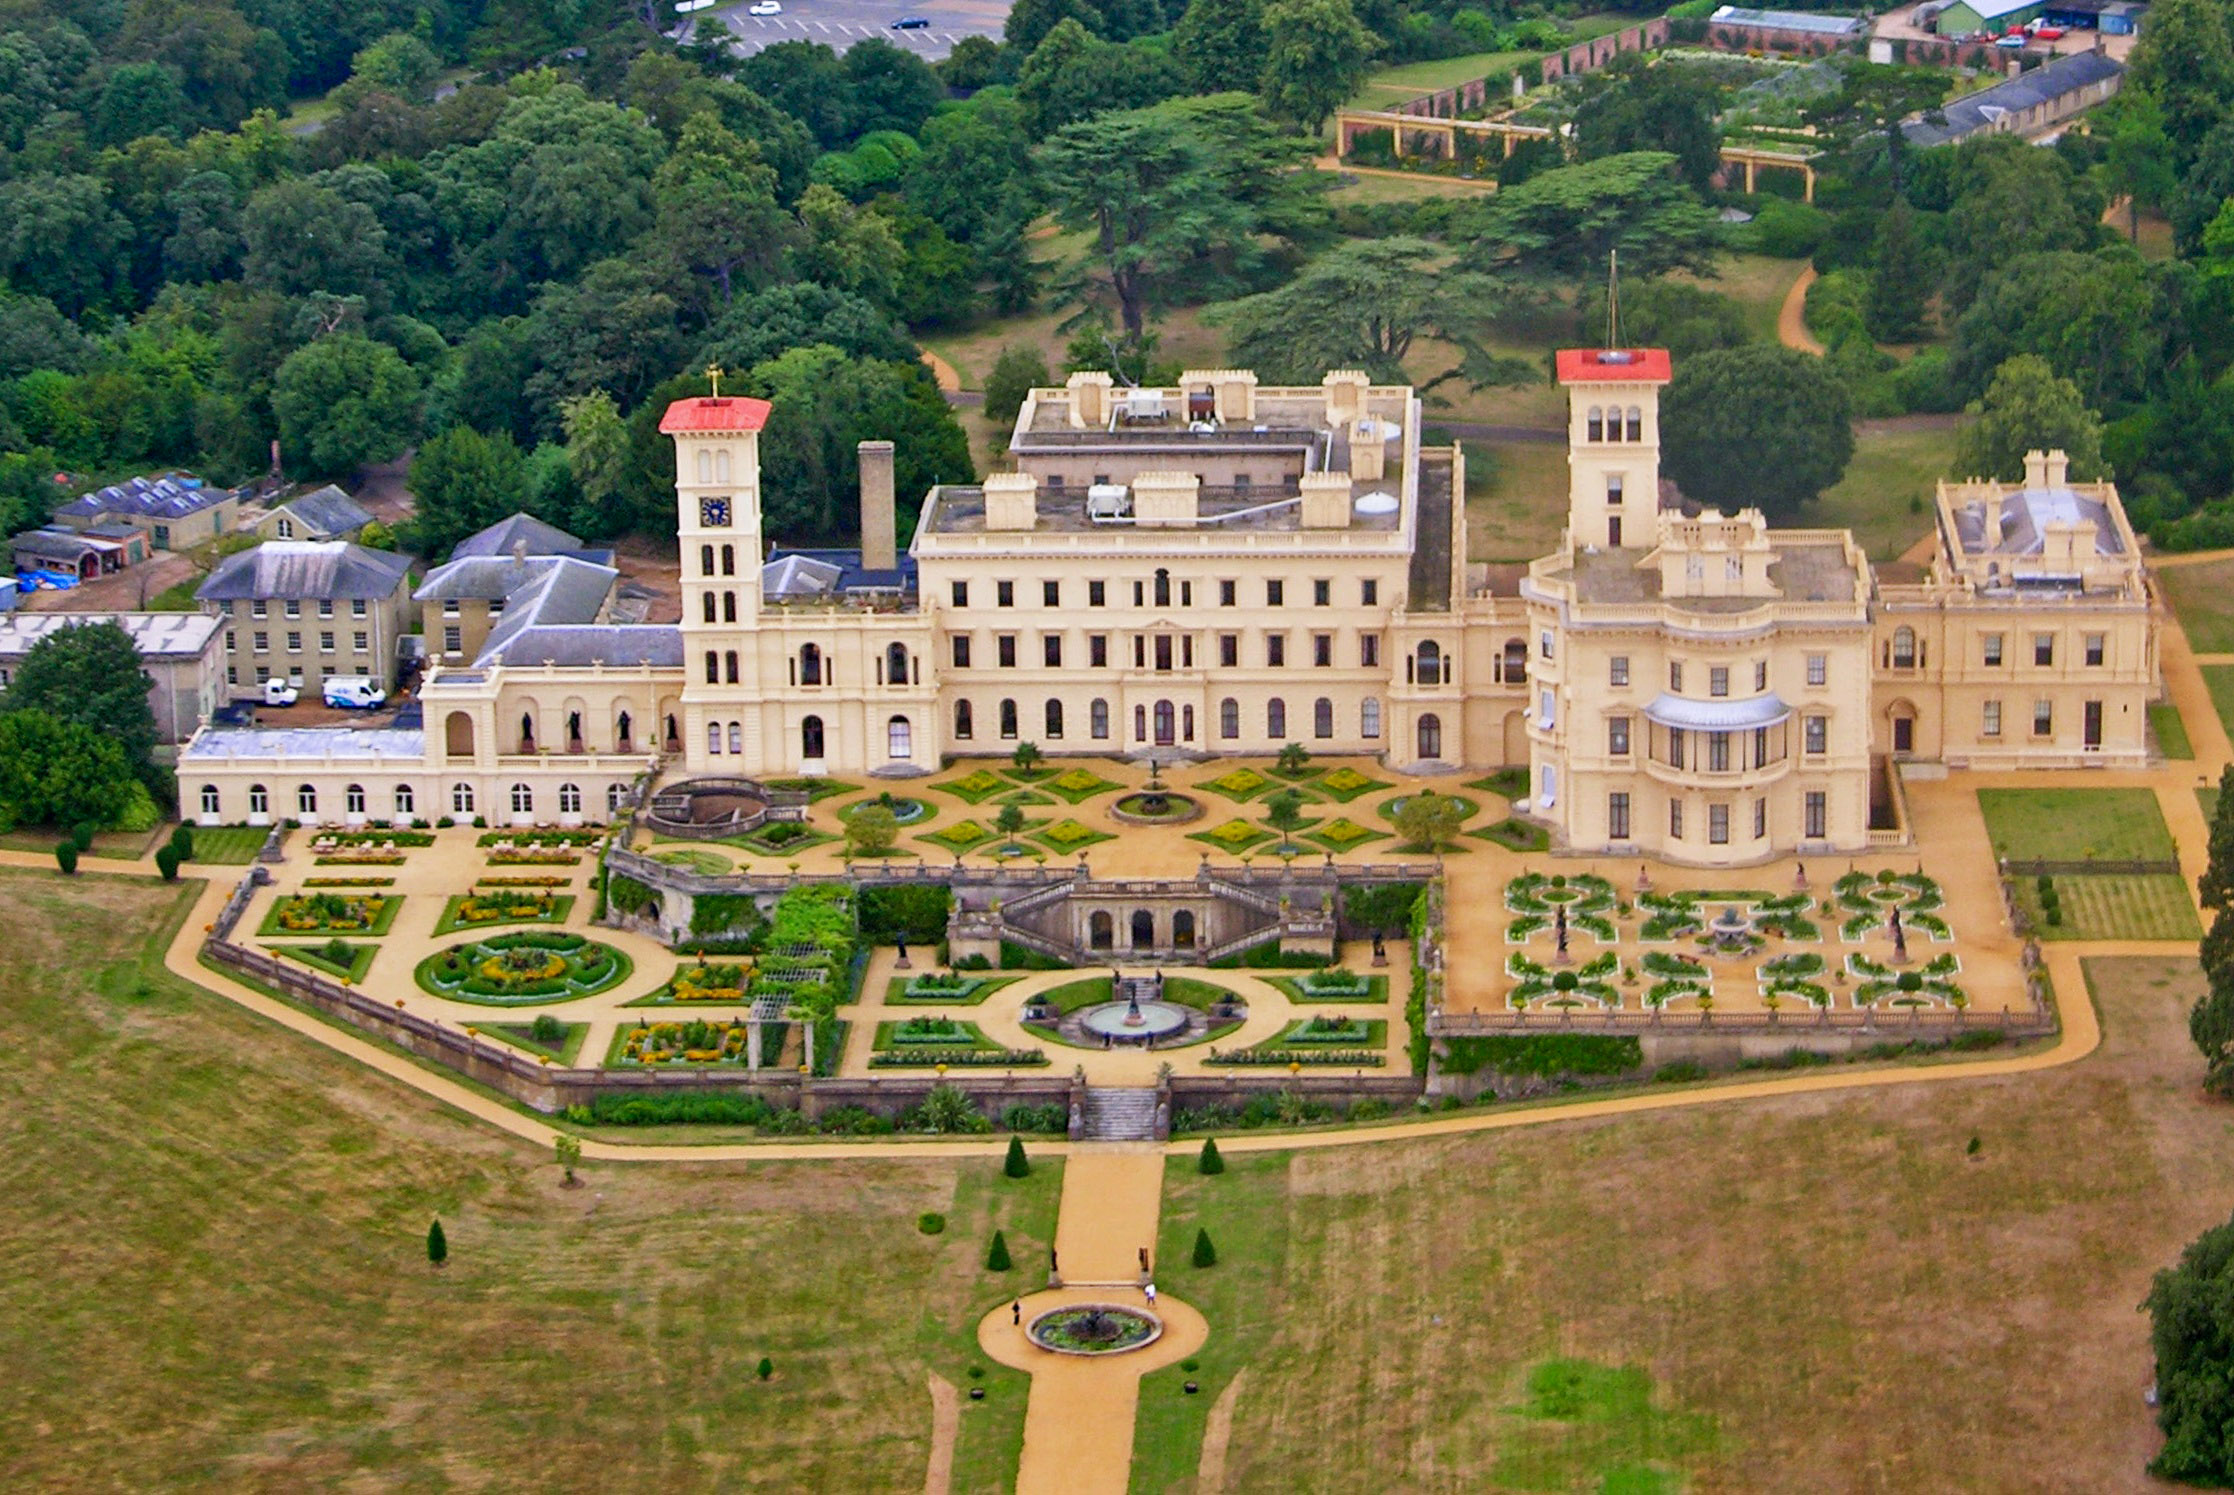 Osborne House © Humac45 - licence [CC BY-SA 3.0] from Wikimedia Commons